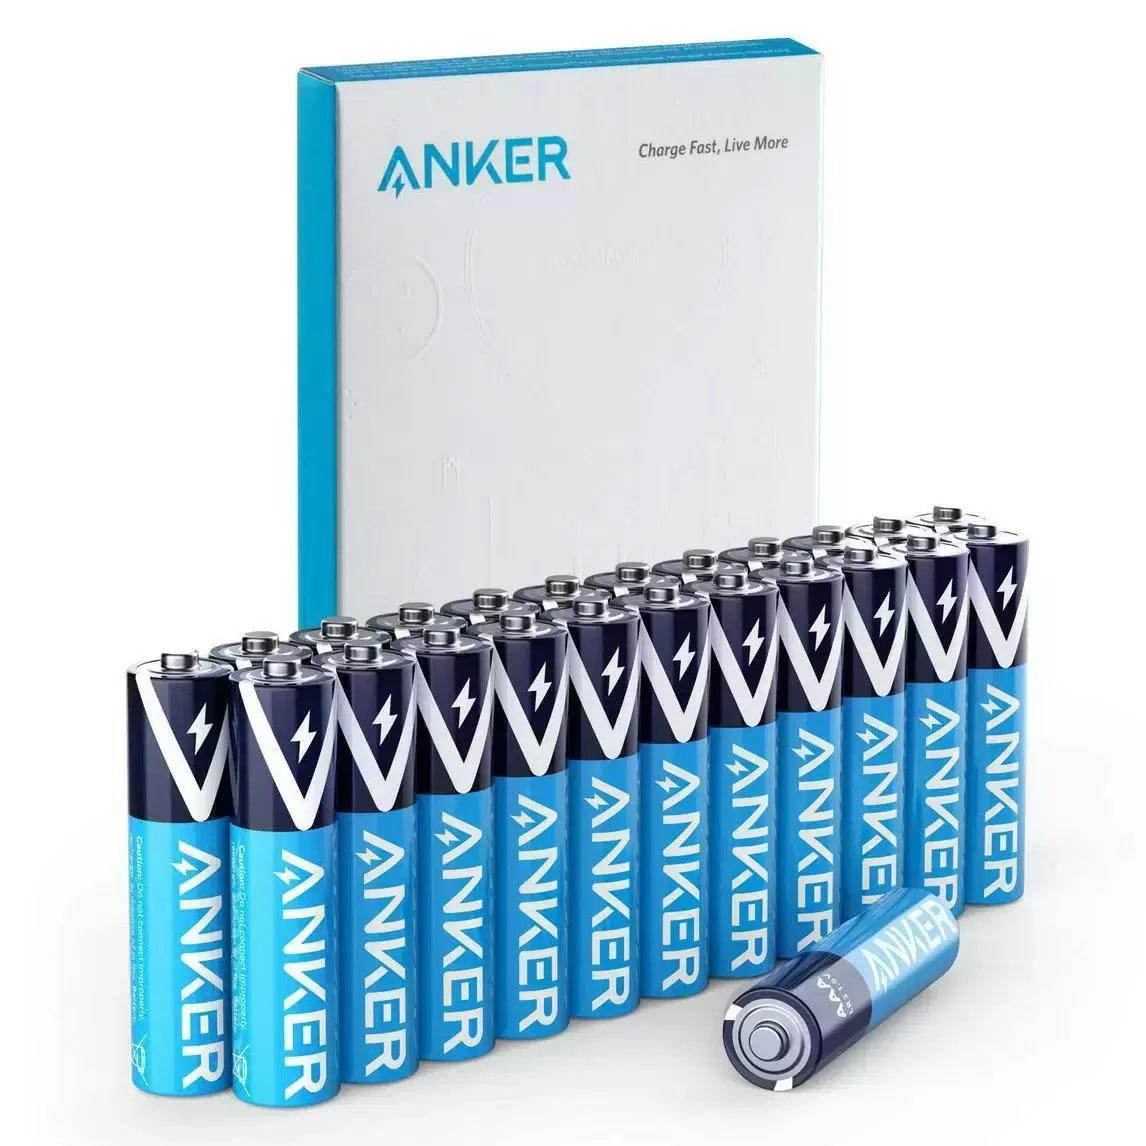 24x Anker AAA Alkaline Batteries for $5.69 Shipped